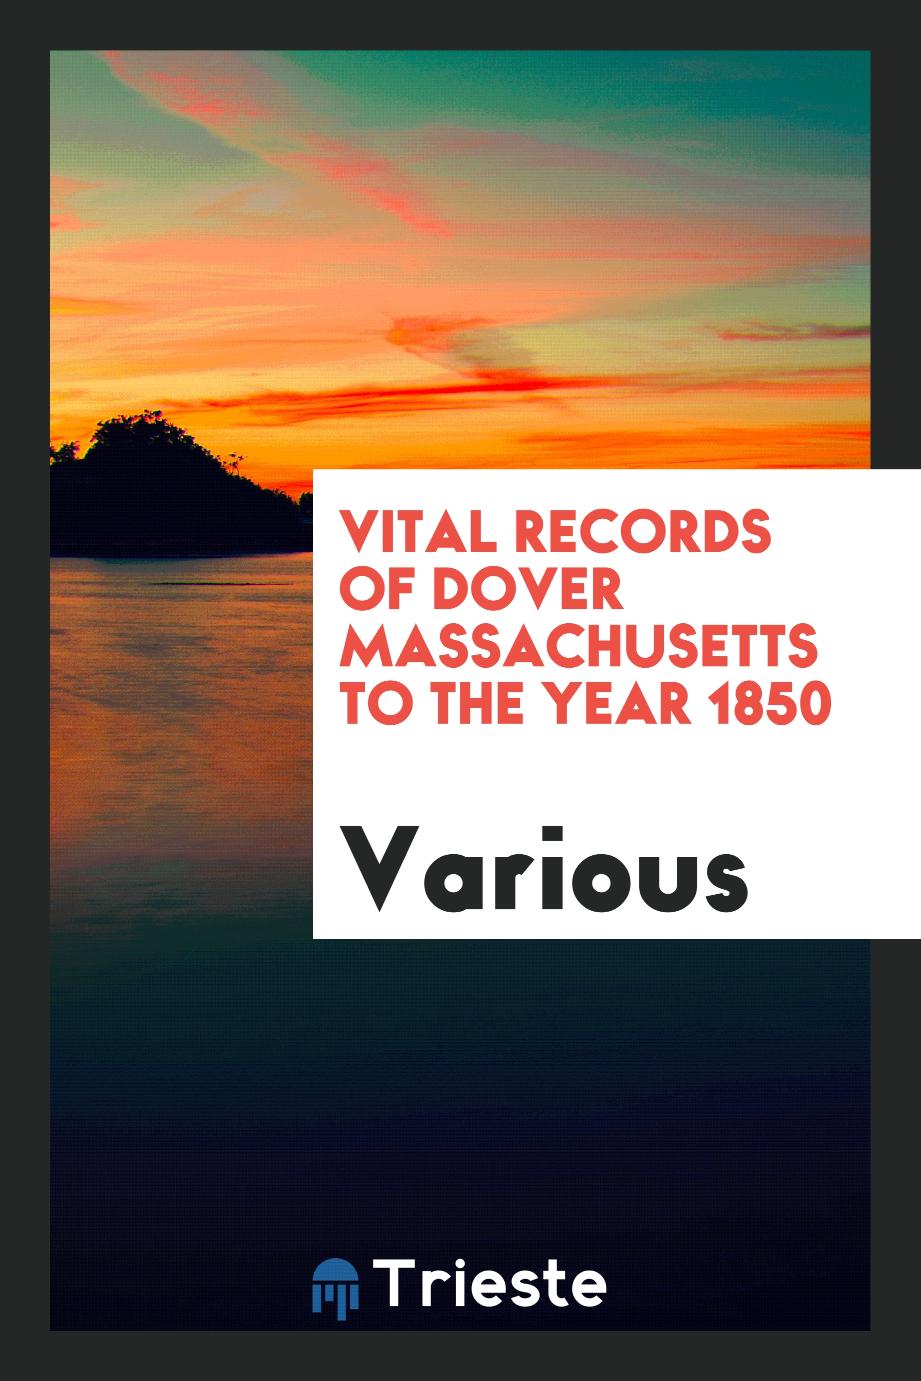 Vital Records of Dover Massachusetts to the Year 1850